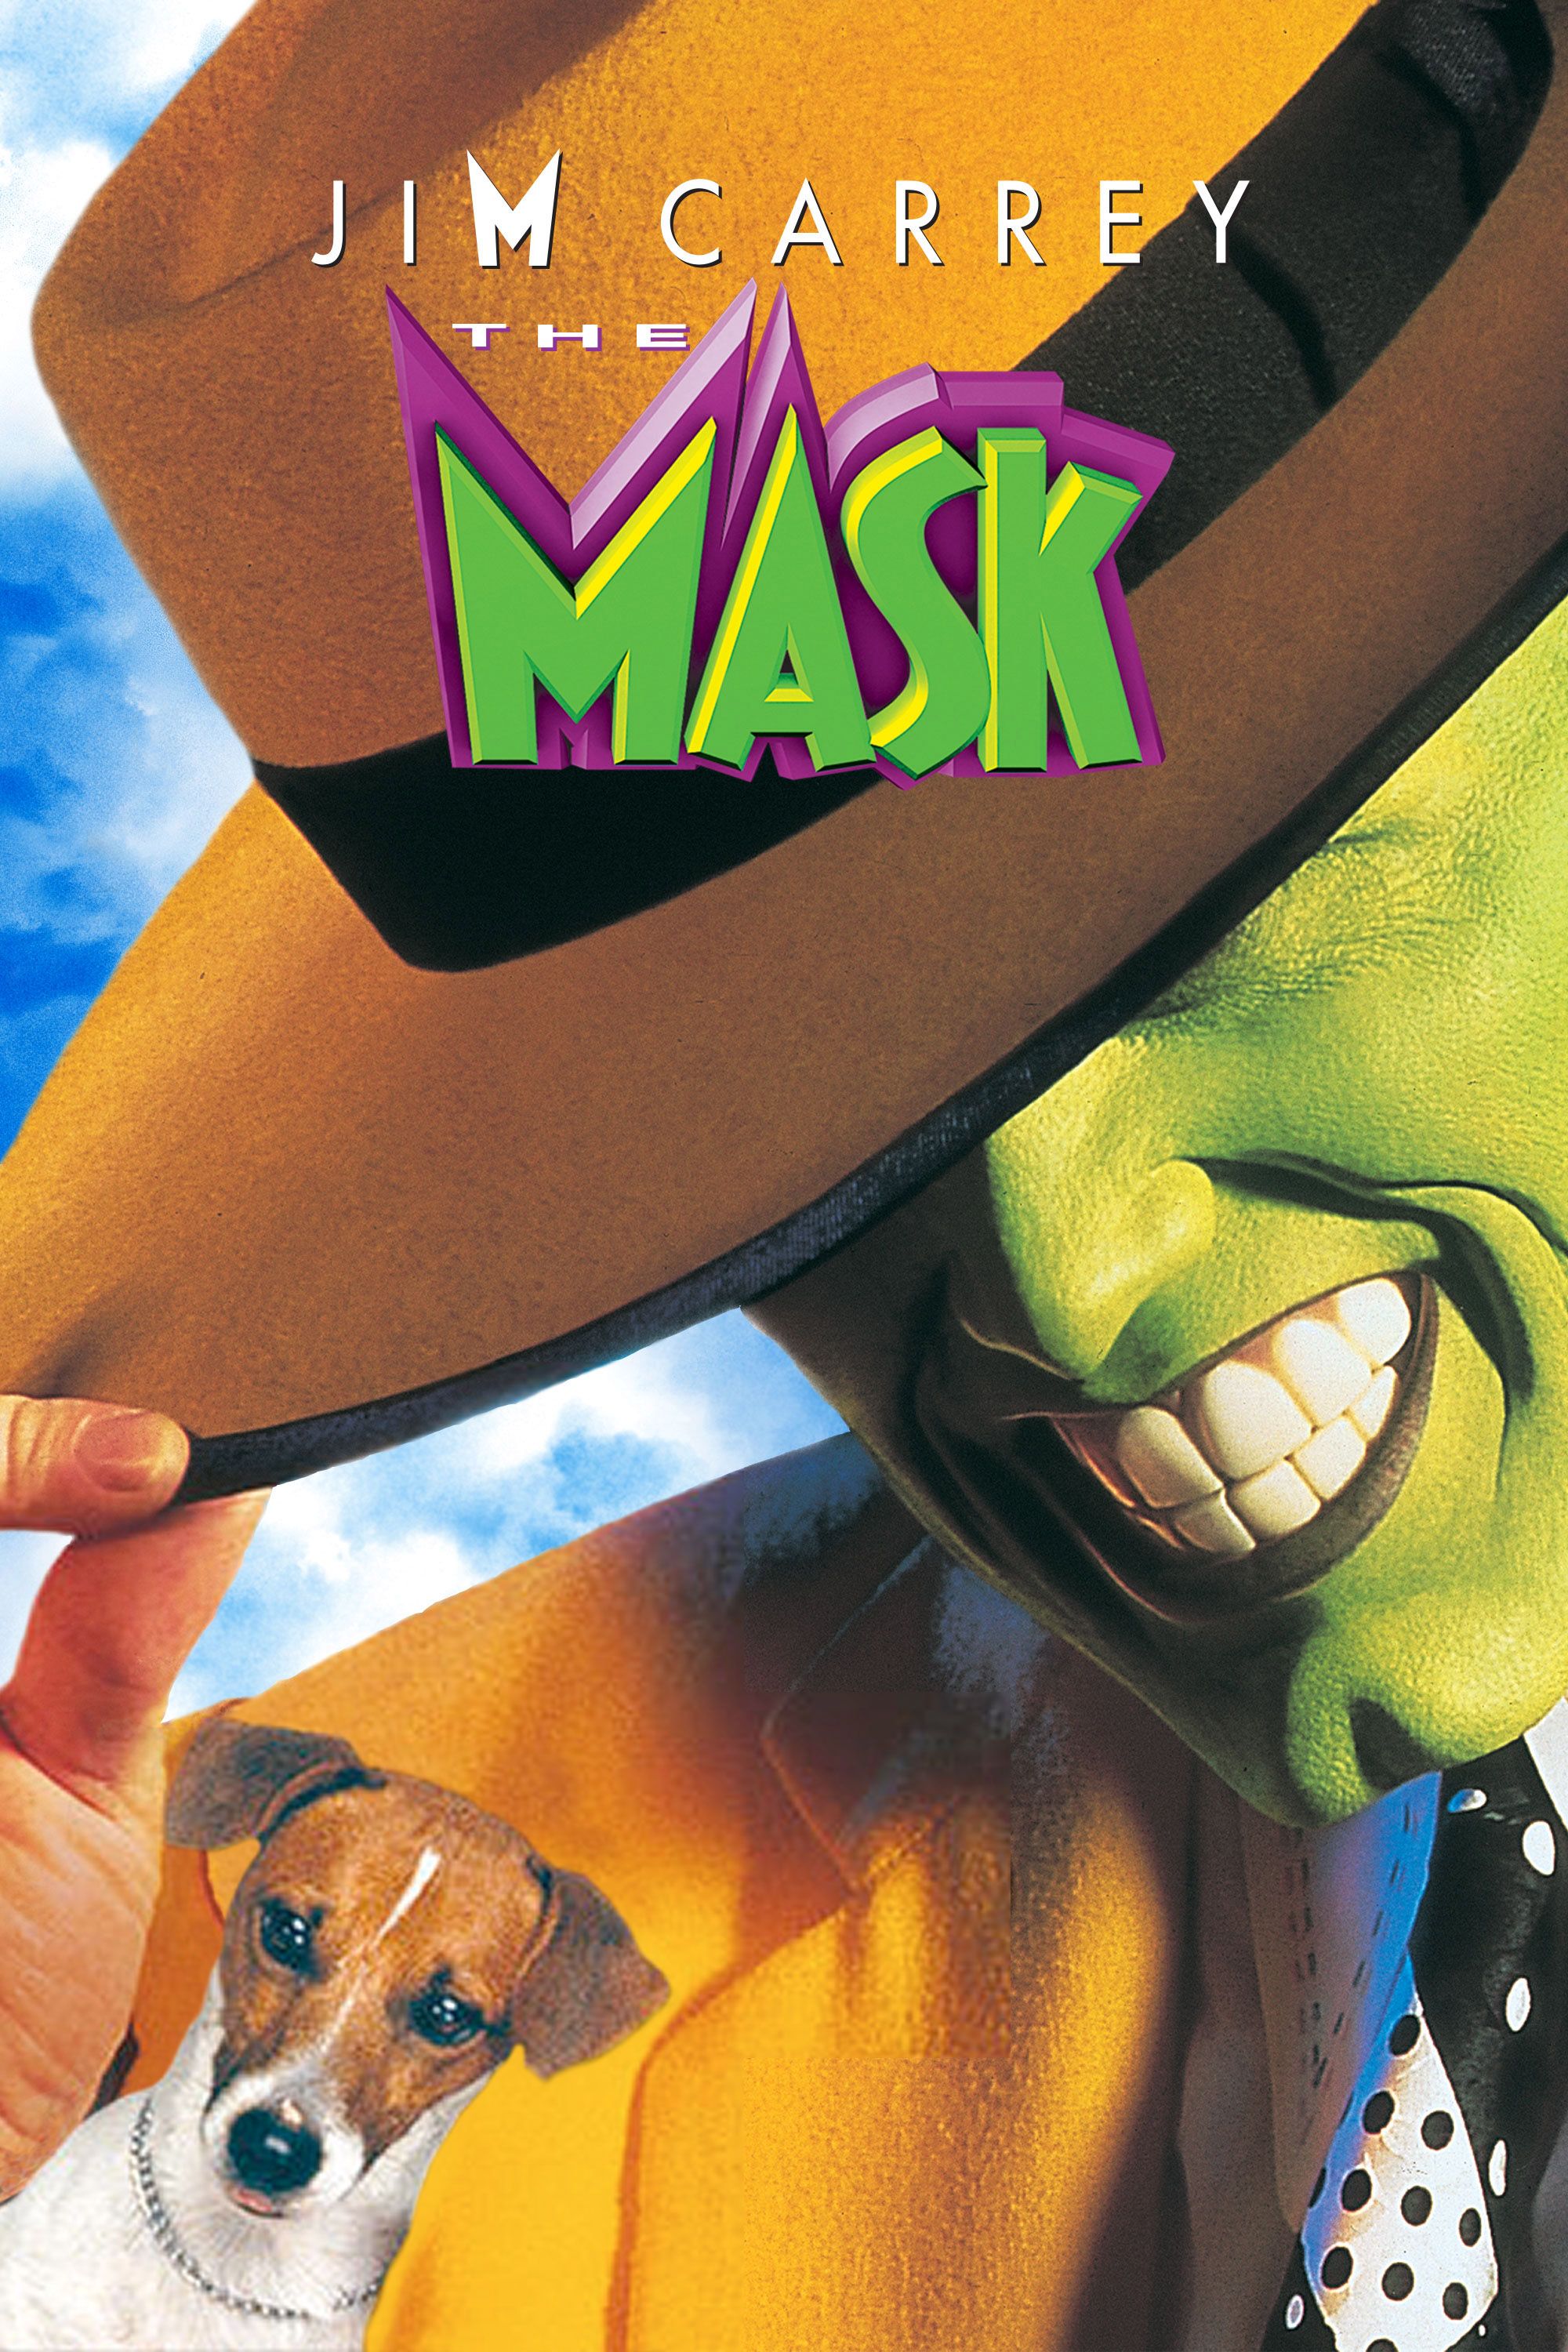 Jim Carrey wants to do a sequel to 'The Mask' on one condition